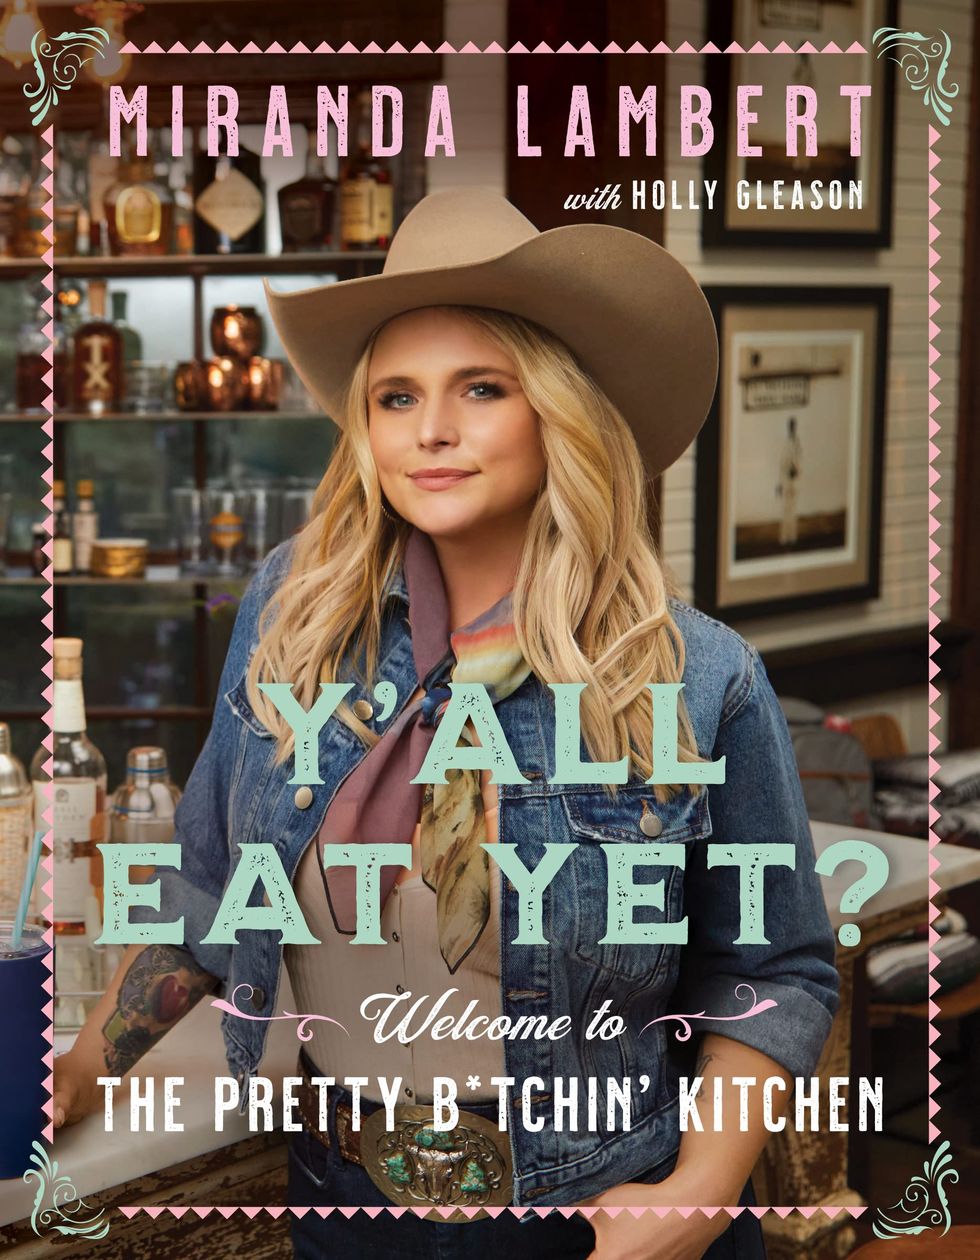 'Y'all Eat Yet?: Welcome to the Pretty B*tchin' Kitchen'